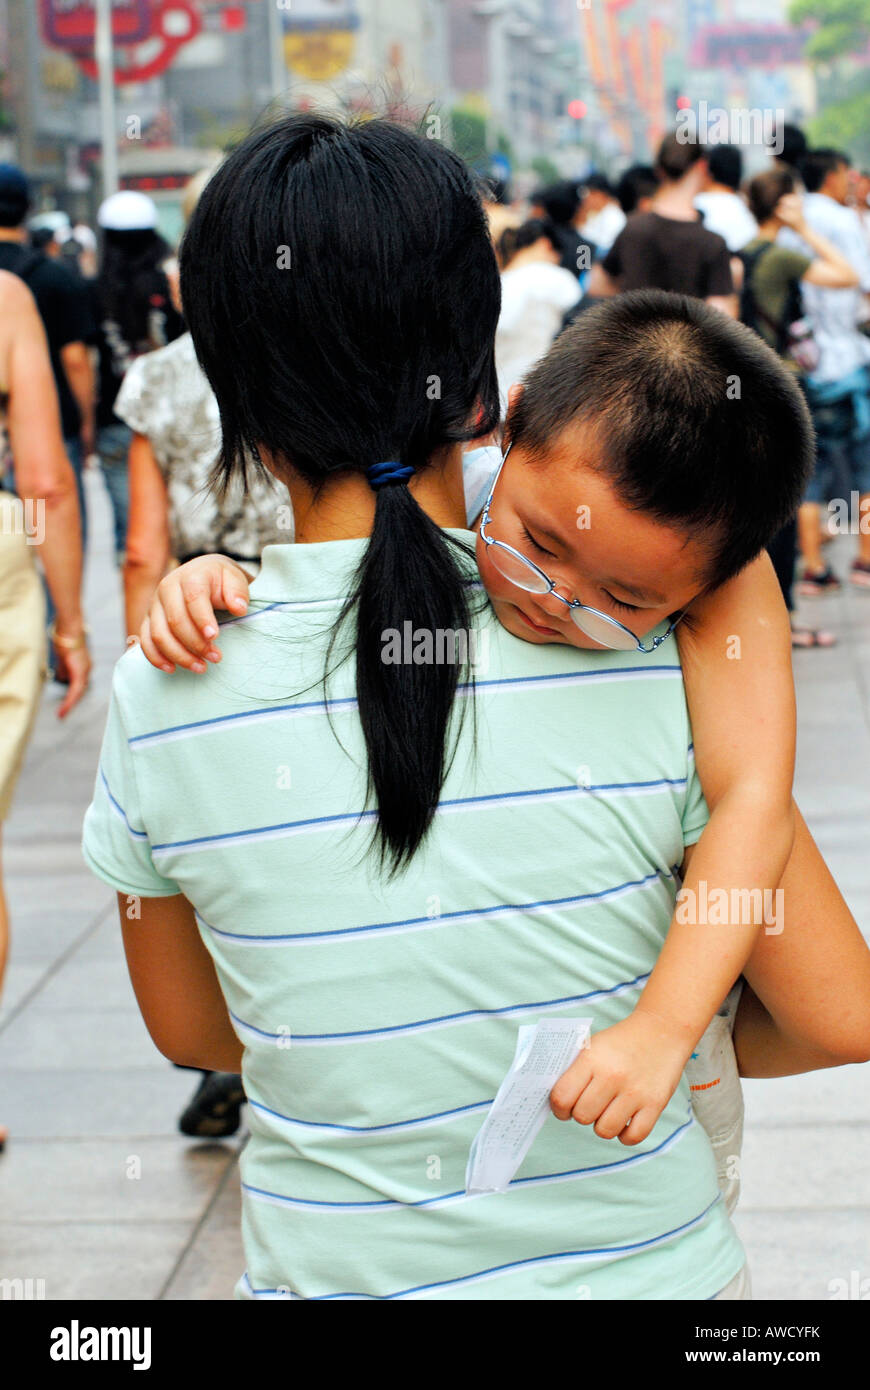 Mother with a tired child, Shanghai, China, Asia Stock Photo